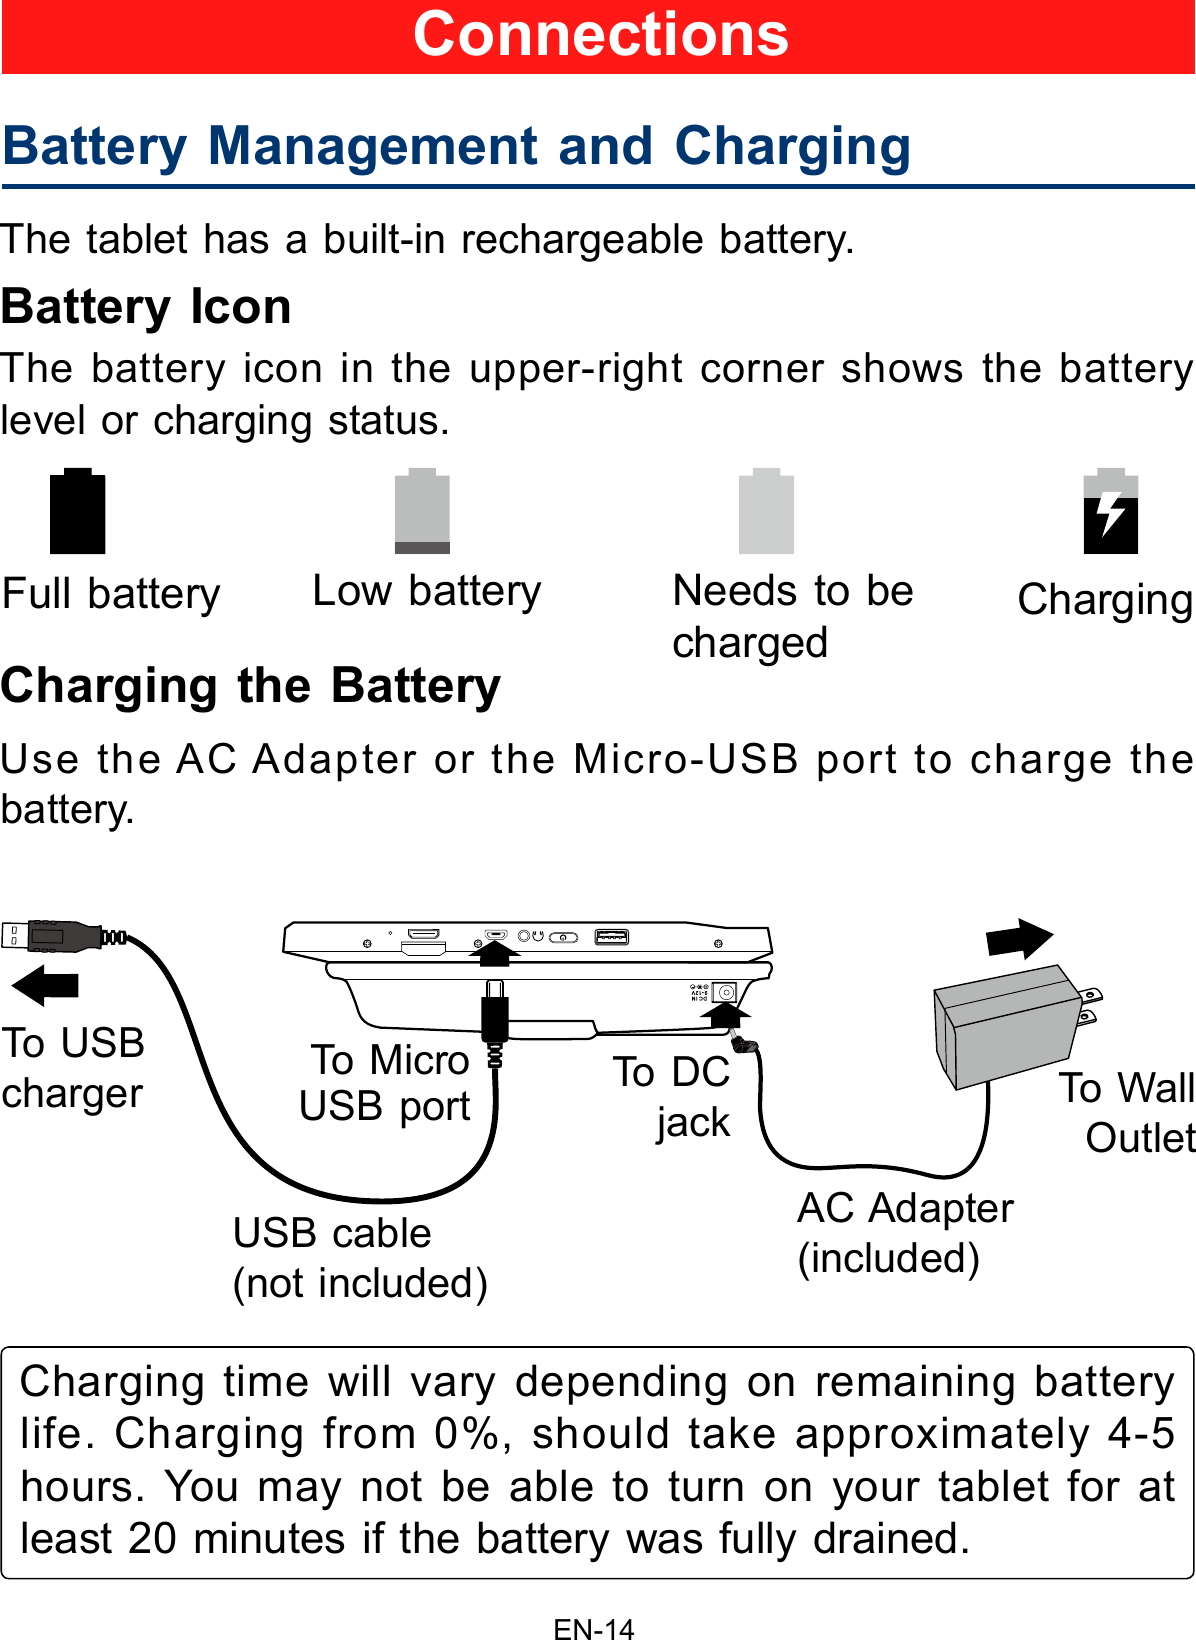                                                                     EN-14The tablet has a built-in rechargeable battery.Battery IconThe battery icon in the upper-right corner shows the battery level or charging status.Charging the BatteryUse the AC Adapter or the Micro-USB port to charge the battery.Battery Management and Charging       Full battery Low battery  Needs to be chargedCharging ConnectionsUSB cable (not  included)  To DC jack To Wall OutletCharging time will vary depending on remaining battery life. Charging from 0%, should take approximately 4-5 hours. You may not be able to turn on your tablet for at least 20 minutes if the battery was fully drained.AC Adapter (included) To Micro USB portTo USB charger